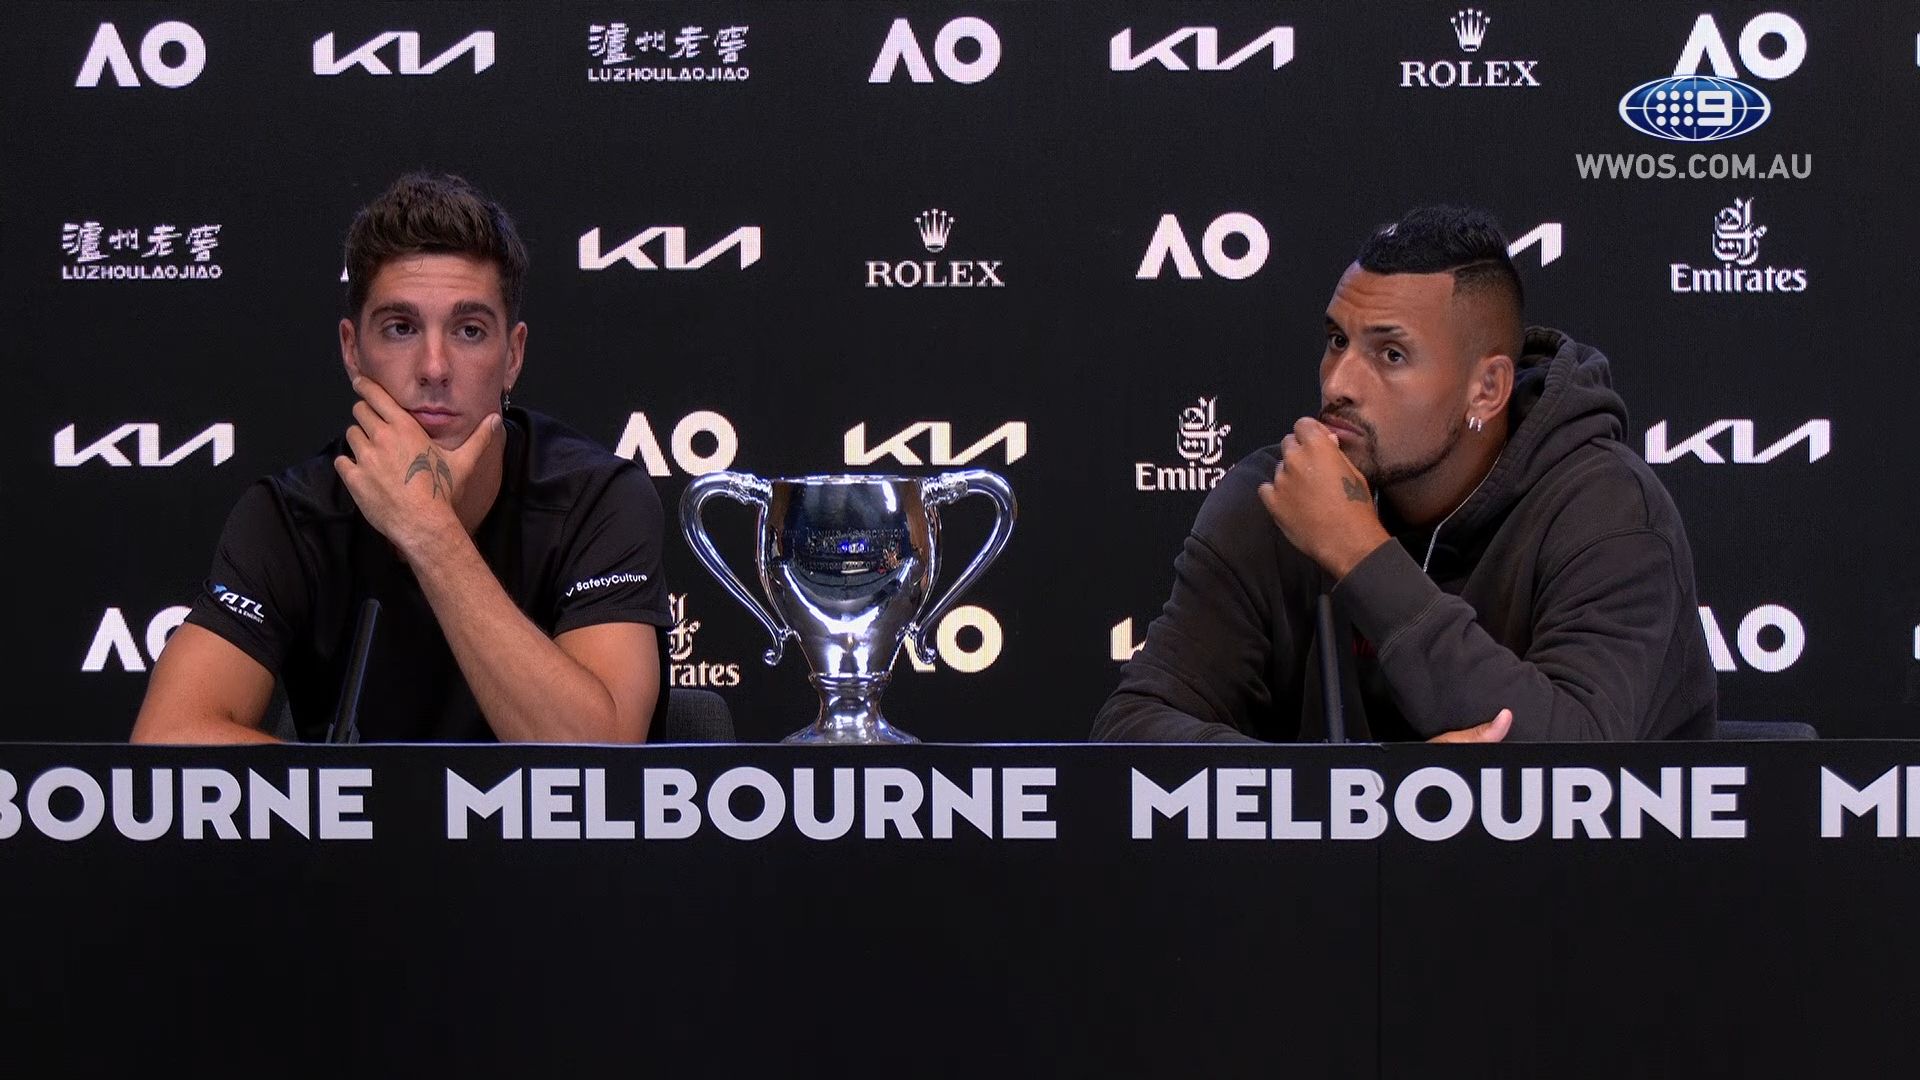 Australian Open champion Nick Kyrgios unloads on media and Max Purcell in angry Instagram tirade